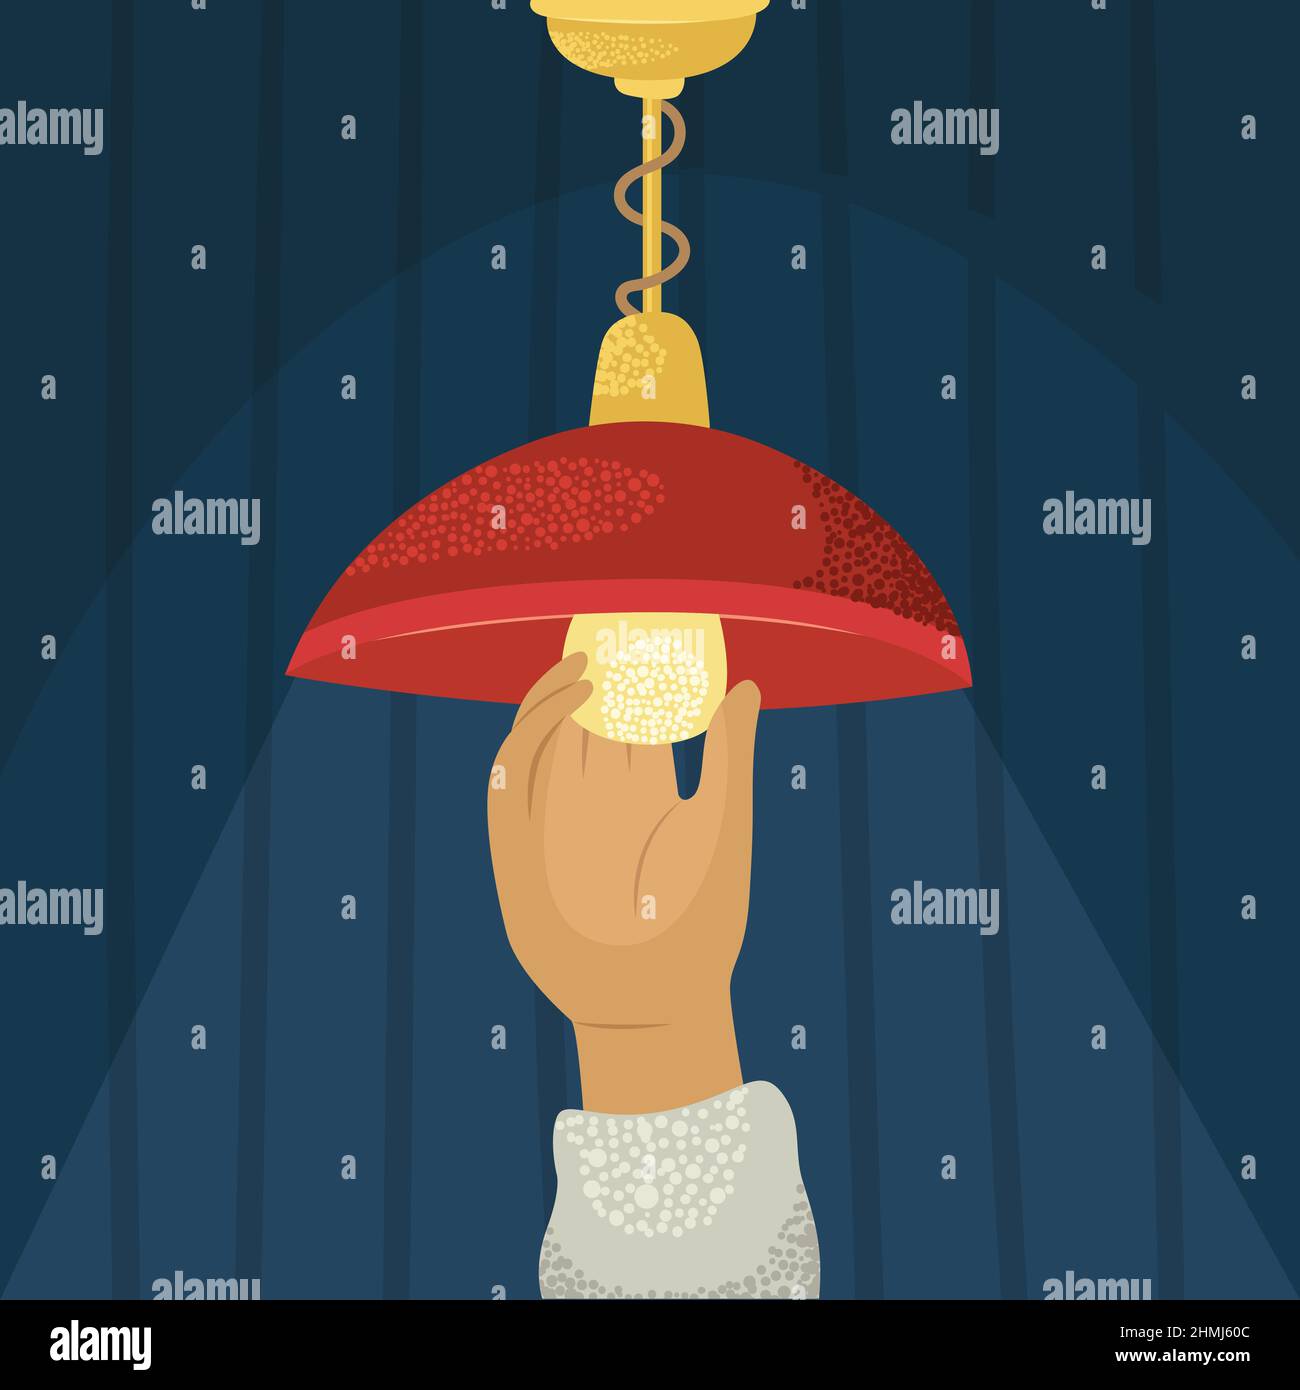 Vector illustration of a man screwing a light bulb into a chandelier. Stock Vector